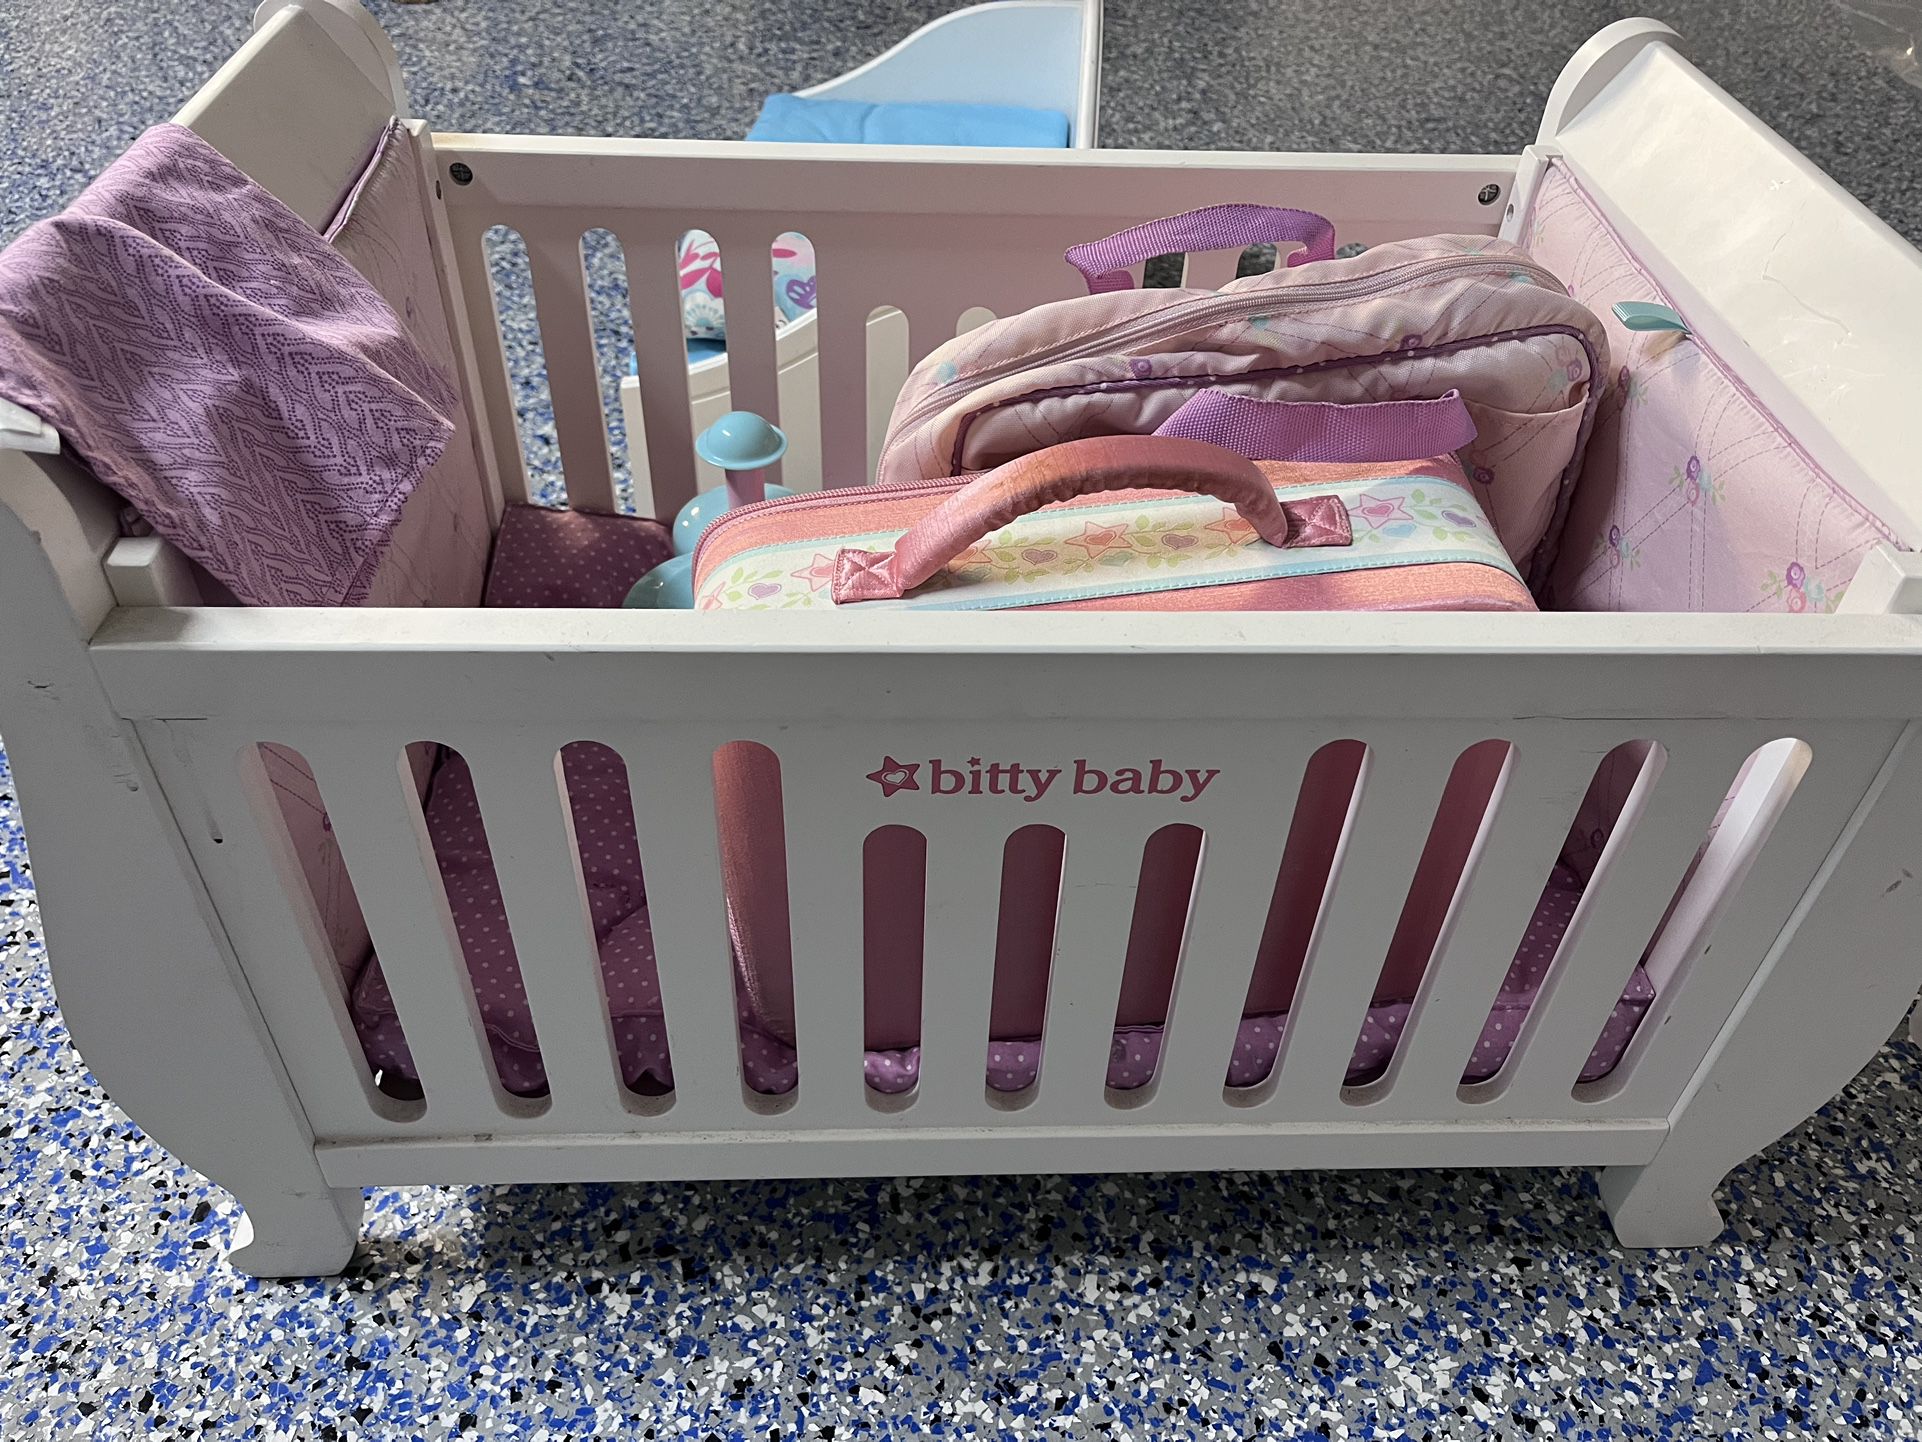 American Girl Bitty Baby Bed And Accessories 